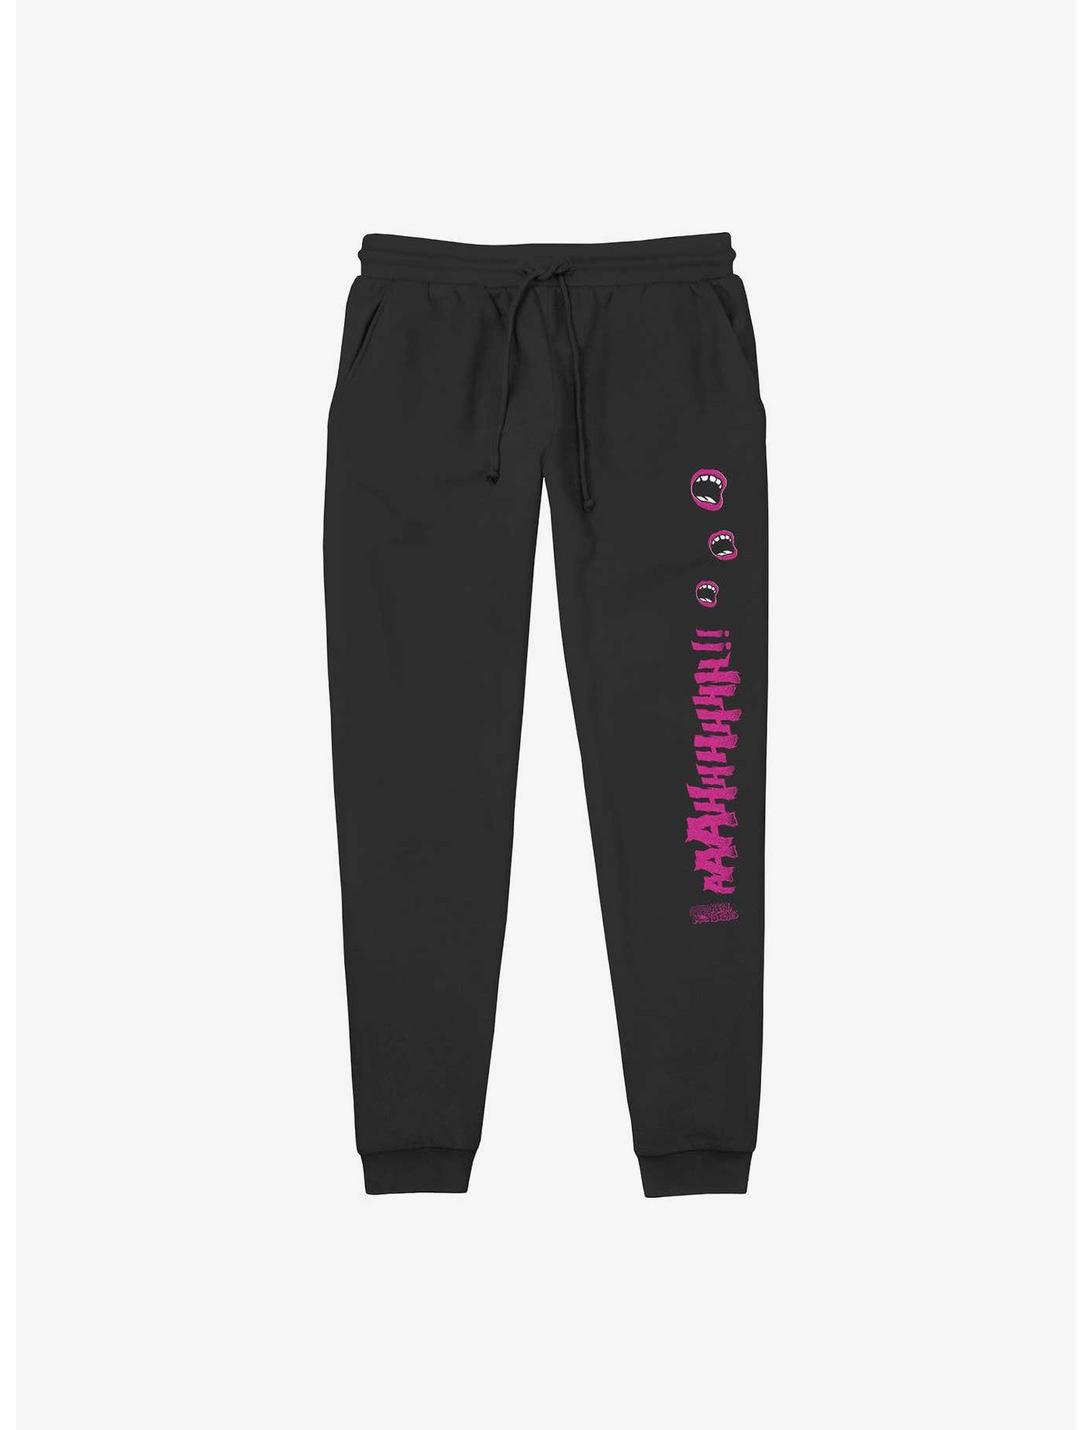 Nickelodeon Aaahh!!! Real Monsters Mouth Icons Jogger Sweatpants, BLACK, hi-res